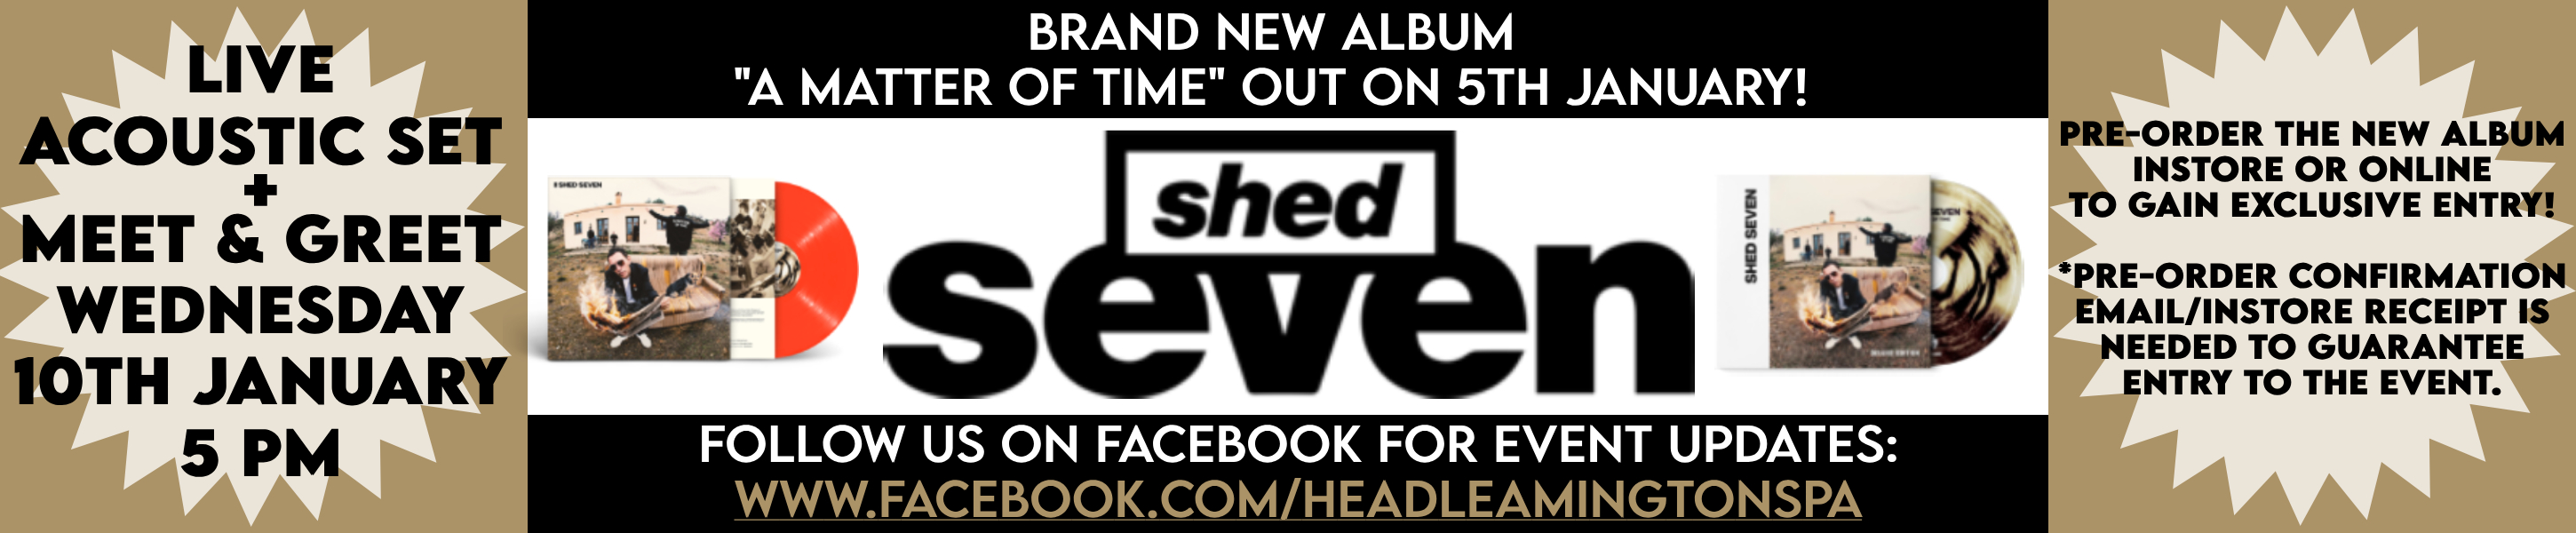 Shed Seven Live Acoustic Set + Meet & Greet Wednesday 10th January 5pm